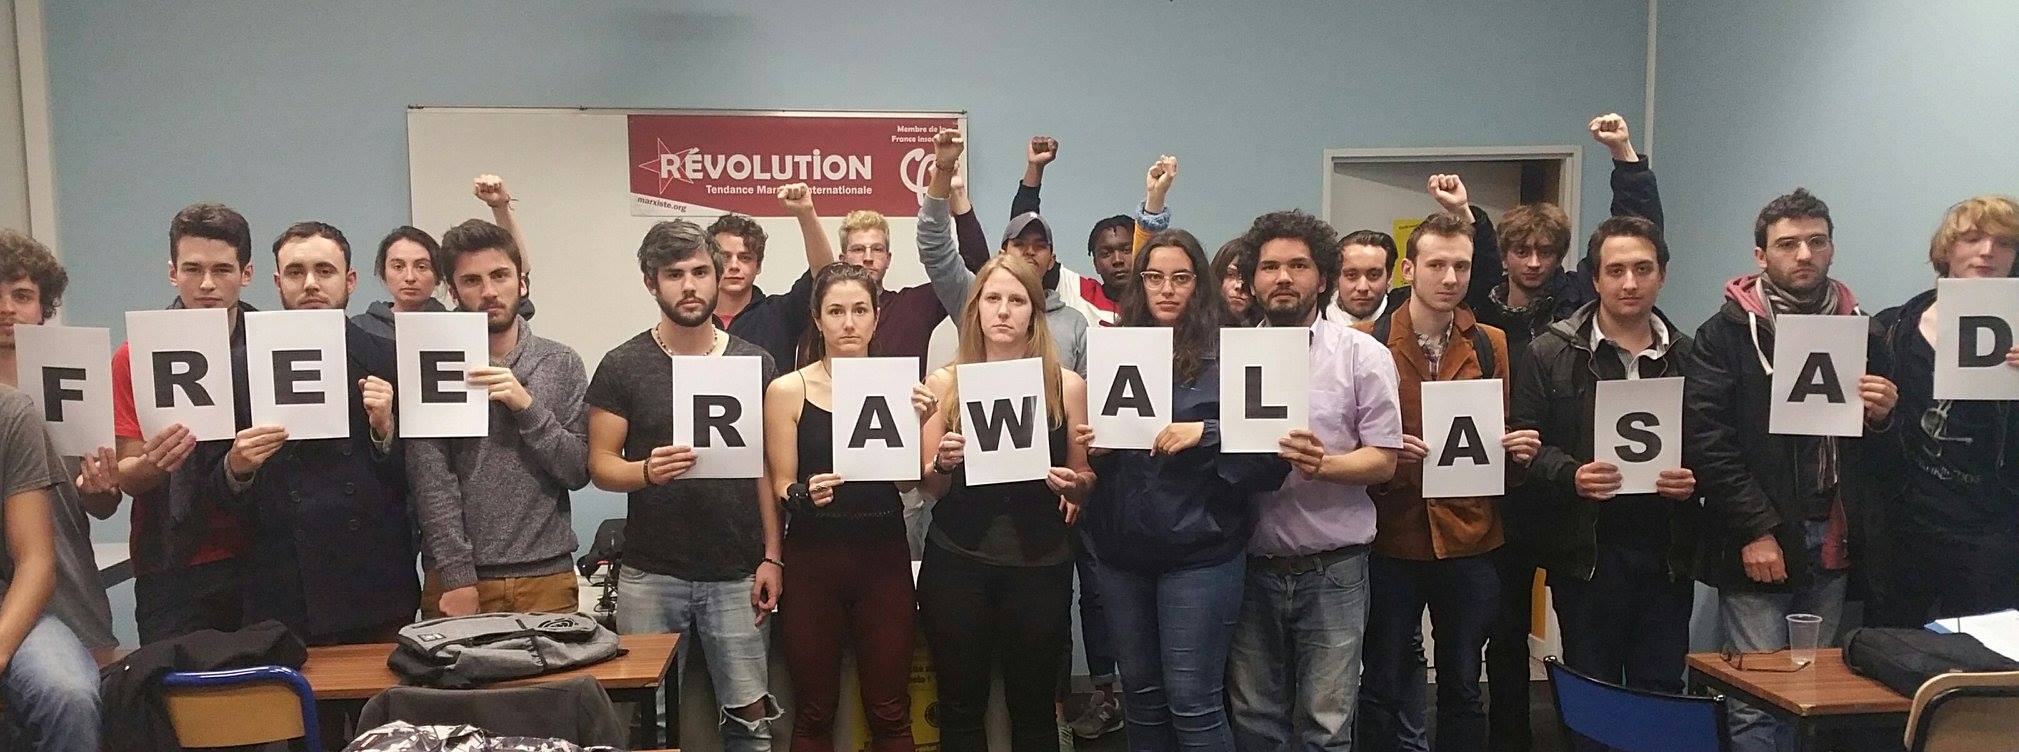 Free Rawal Toulouse France